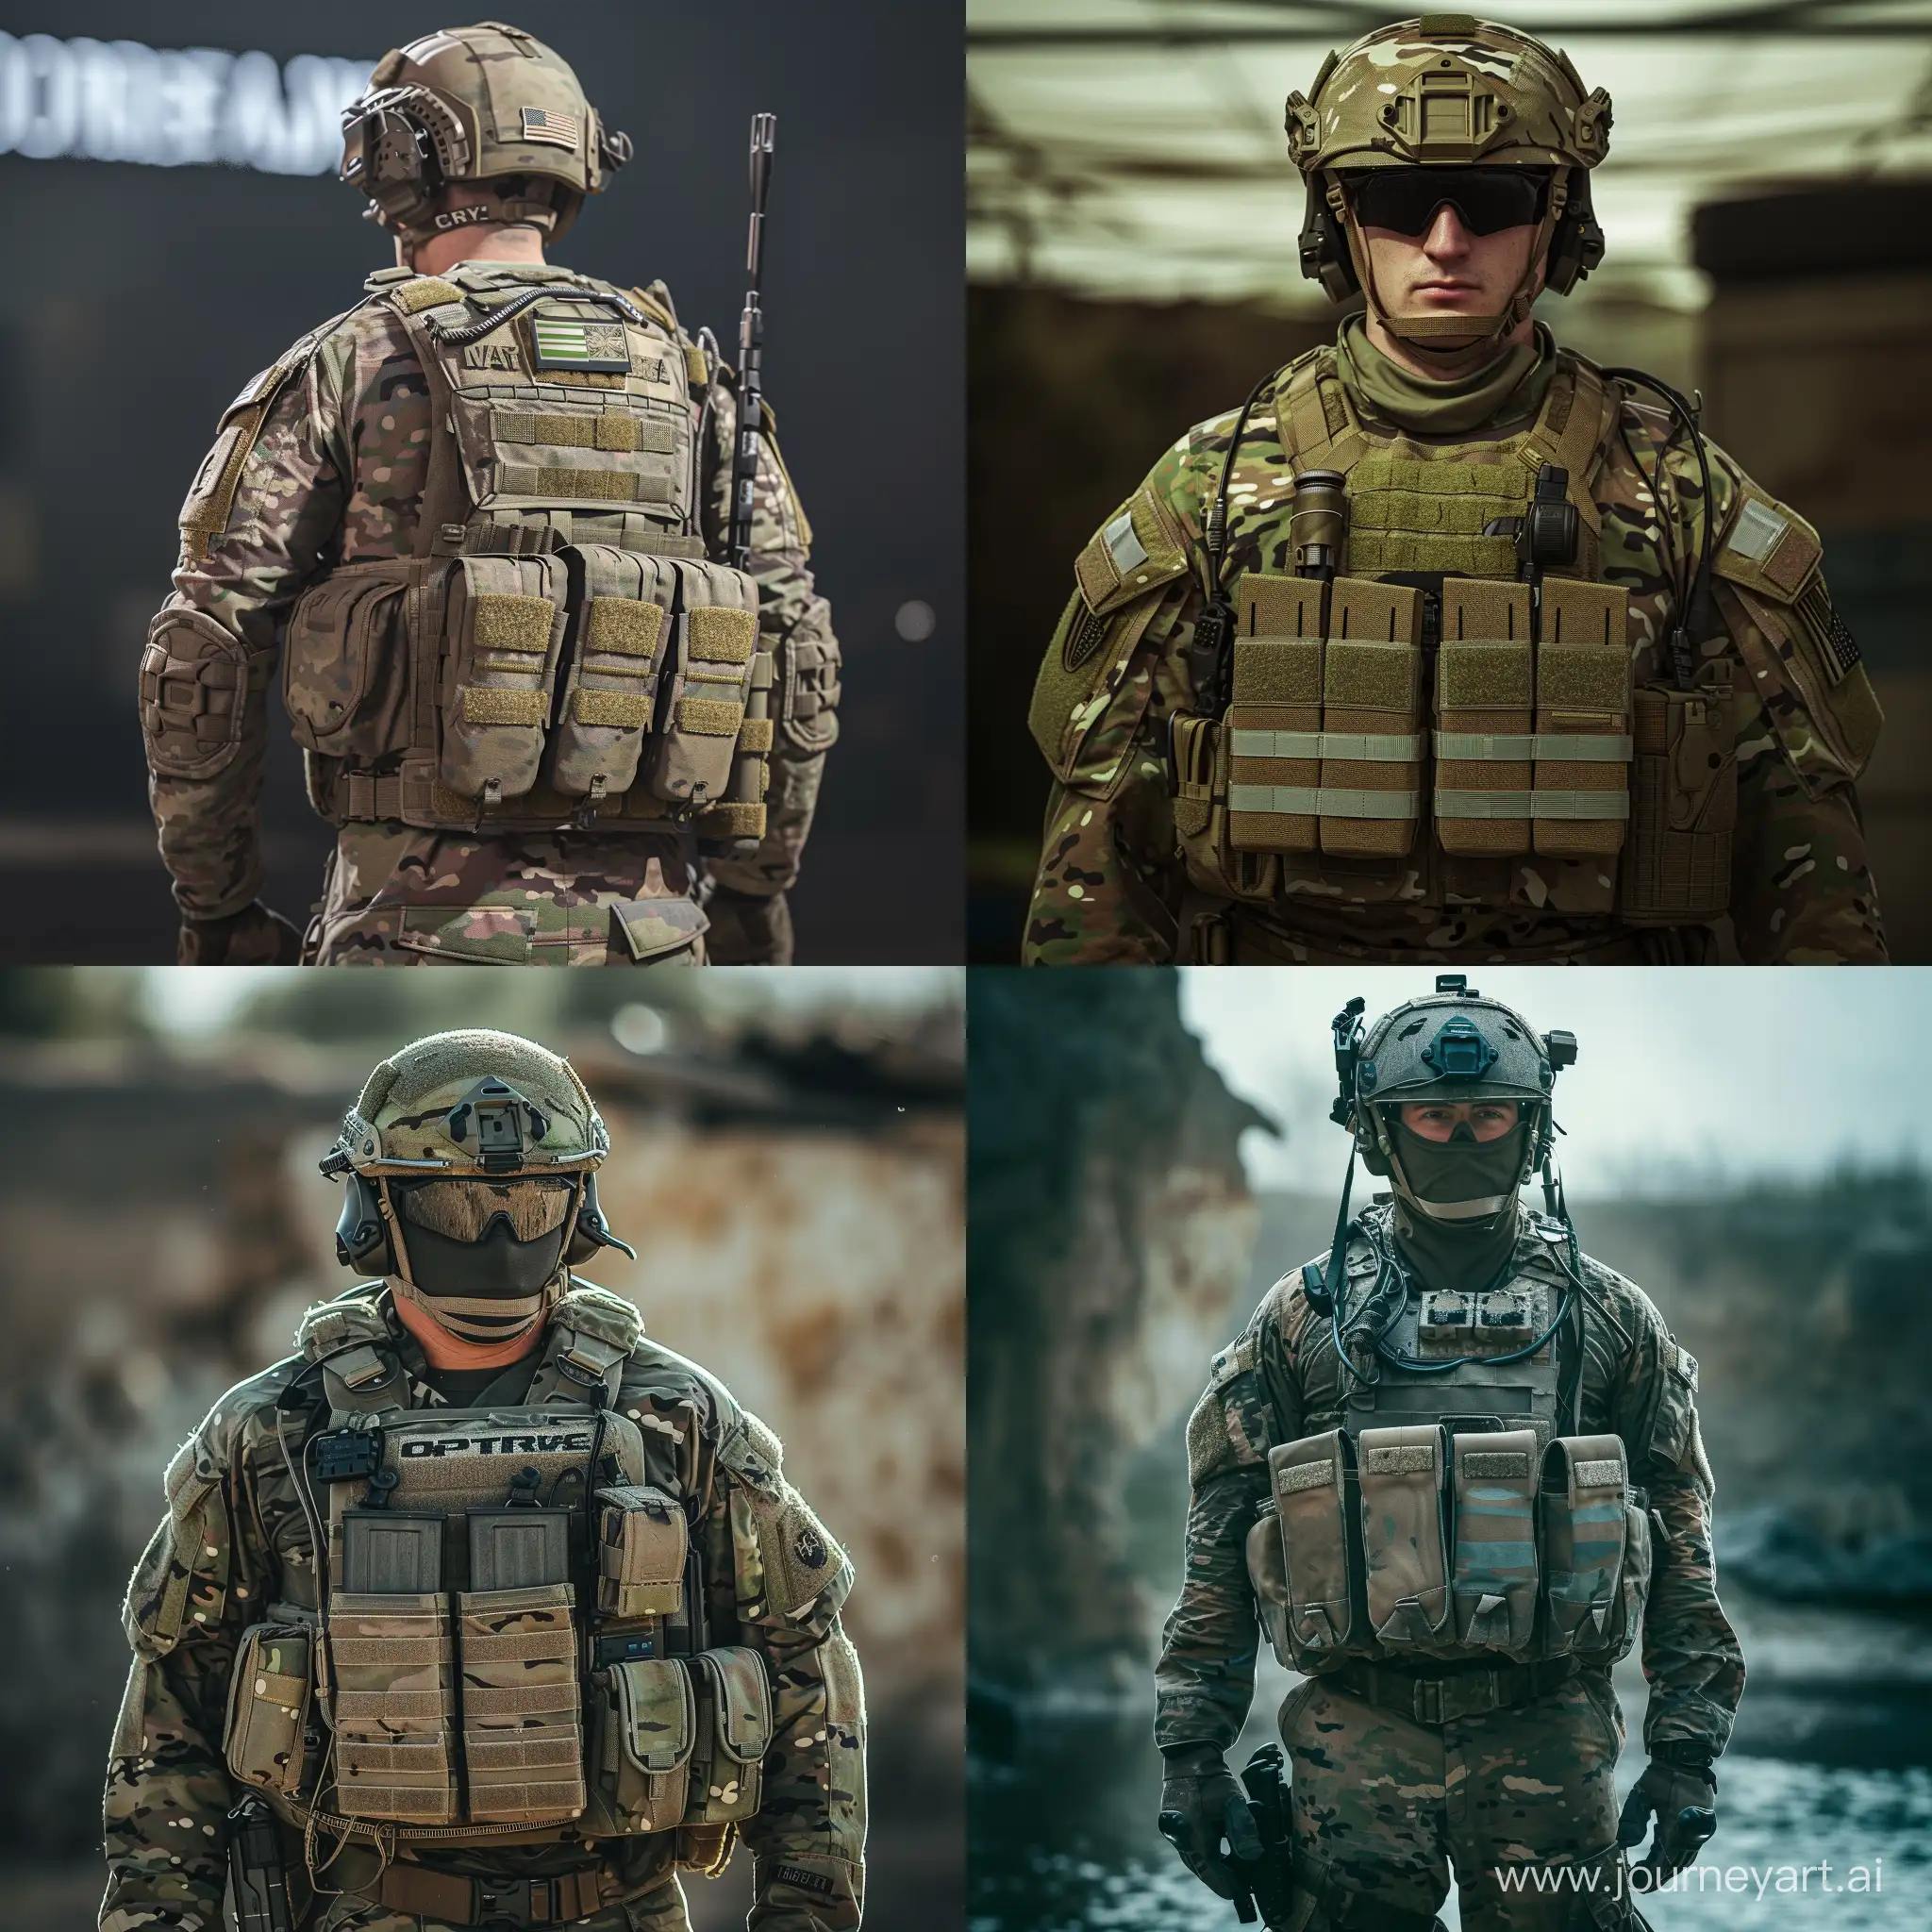 Multicam-Camouflage-Soldier-in-Ops-Core-FAST-Helmet-and-CRYE-AVS-Body-Armor